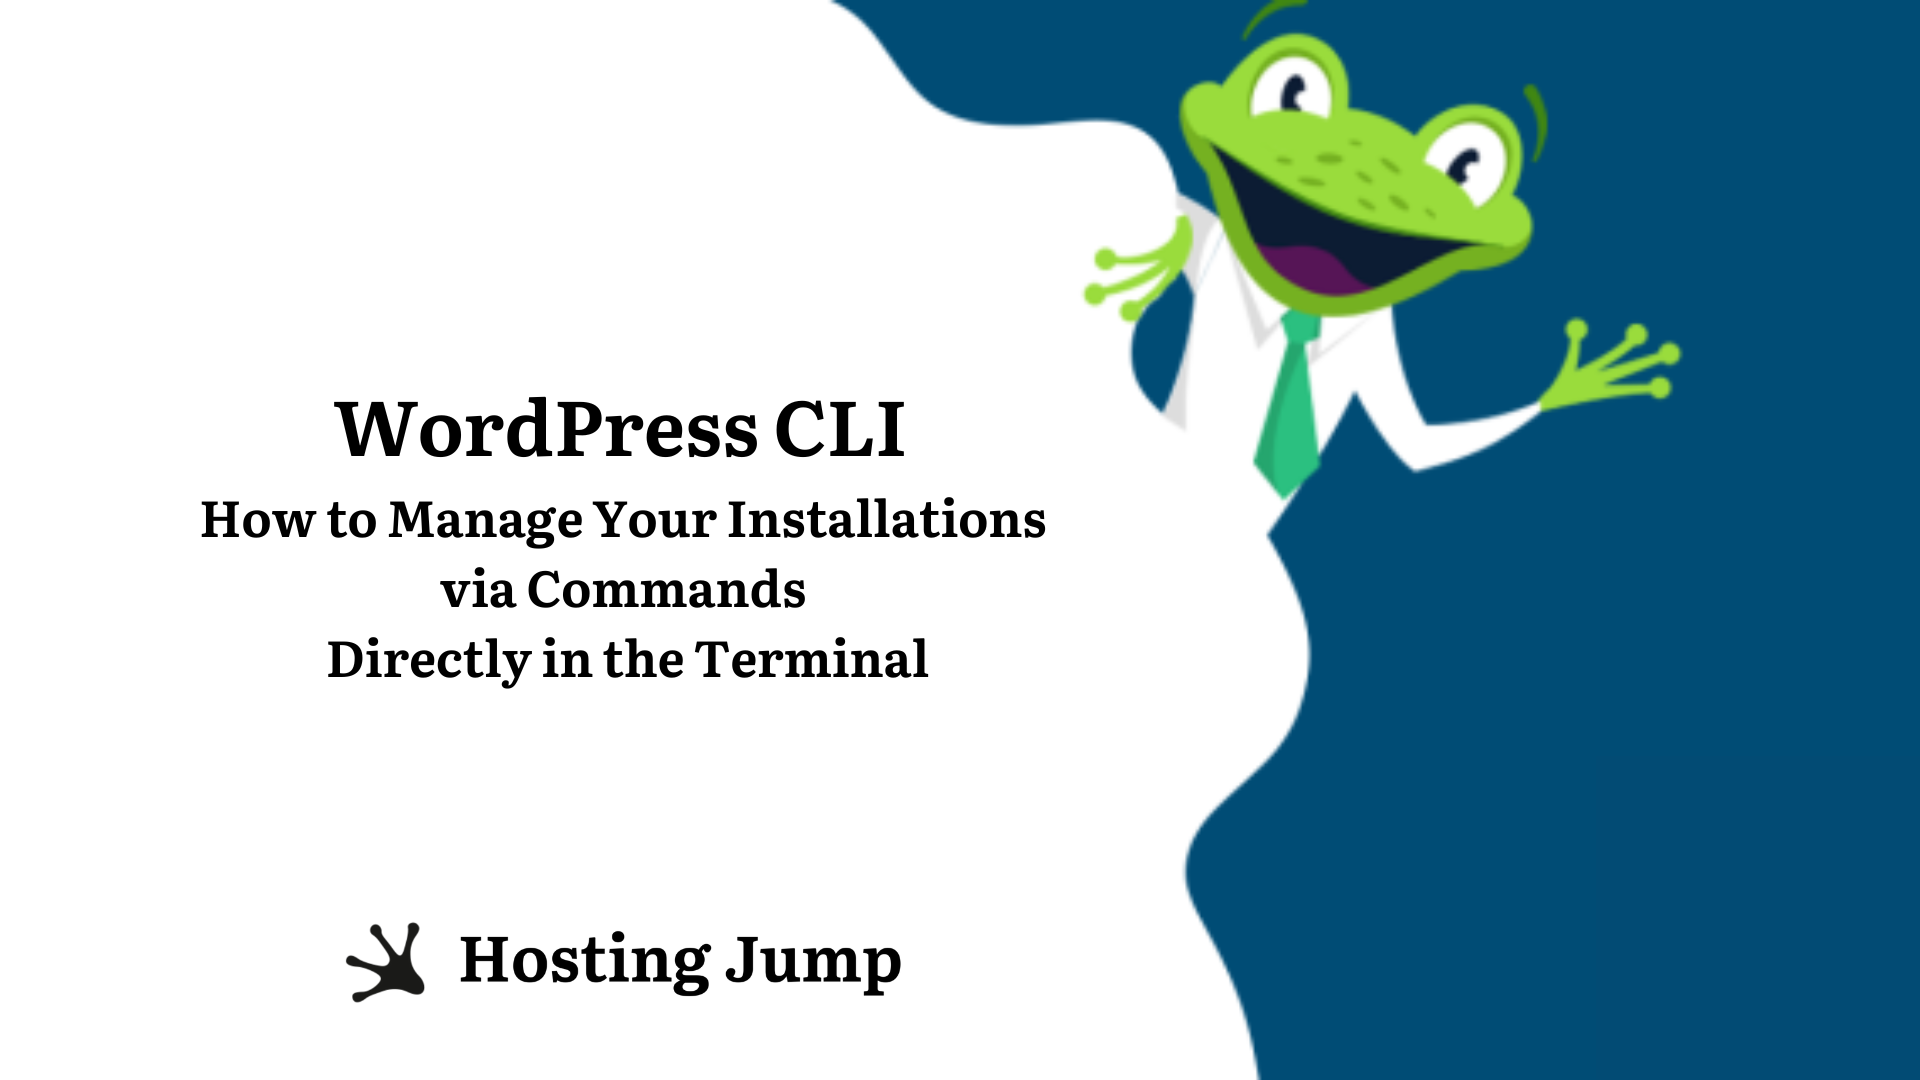 WordPress CLI - How to Manage Your Installations via Commands Directly in the Terminal